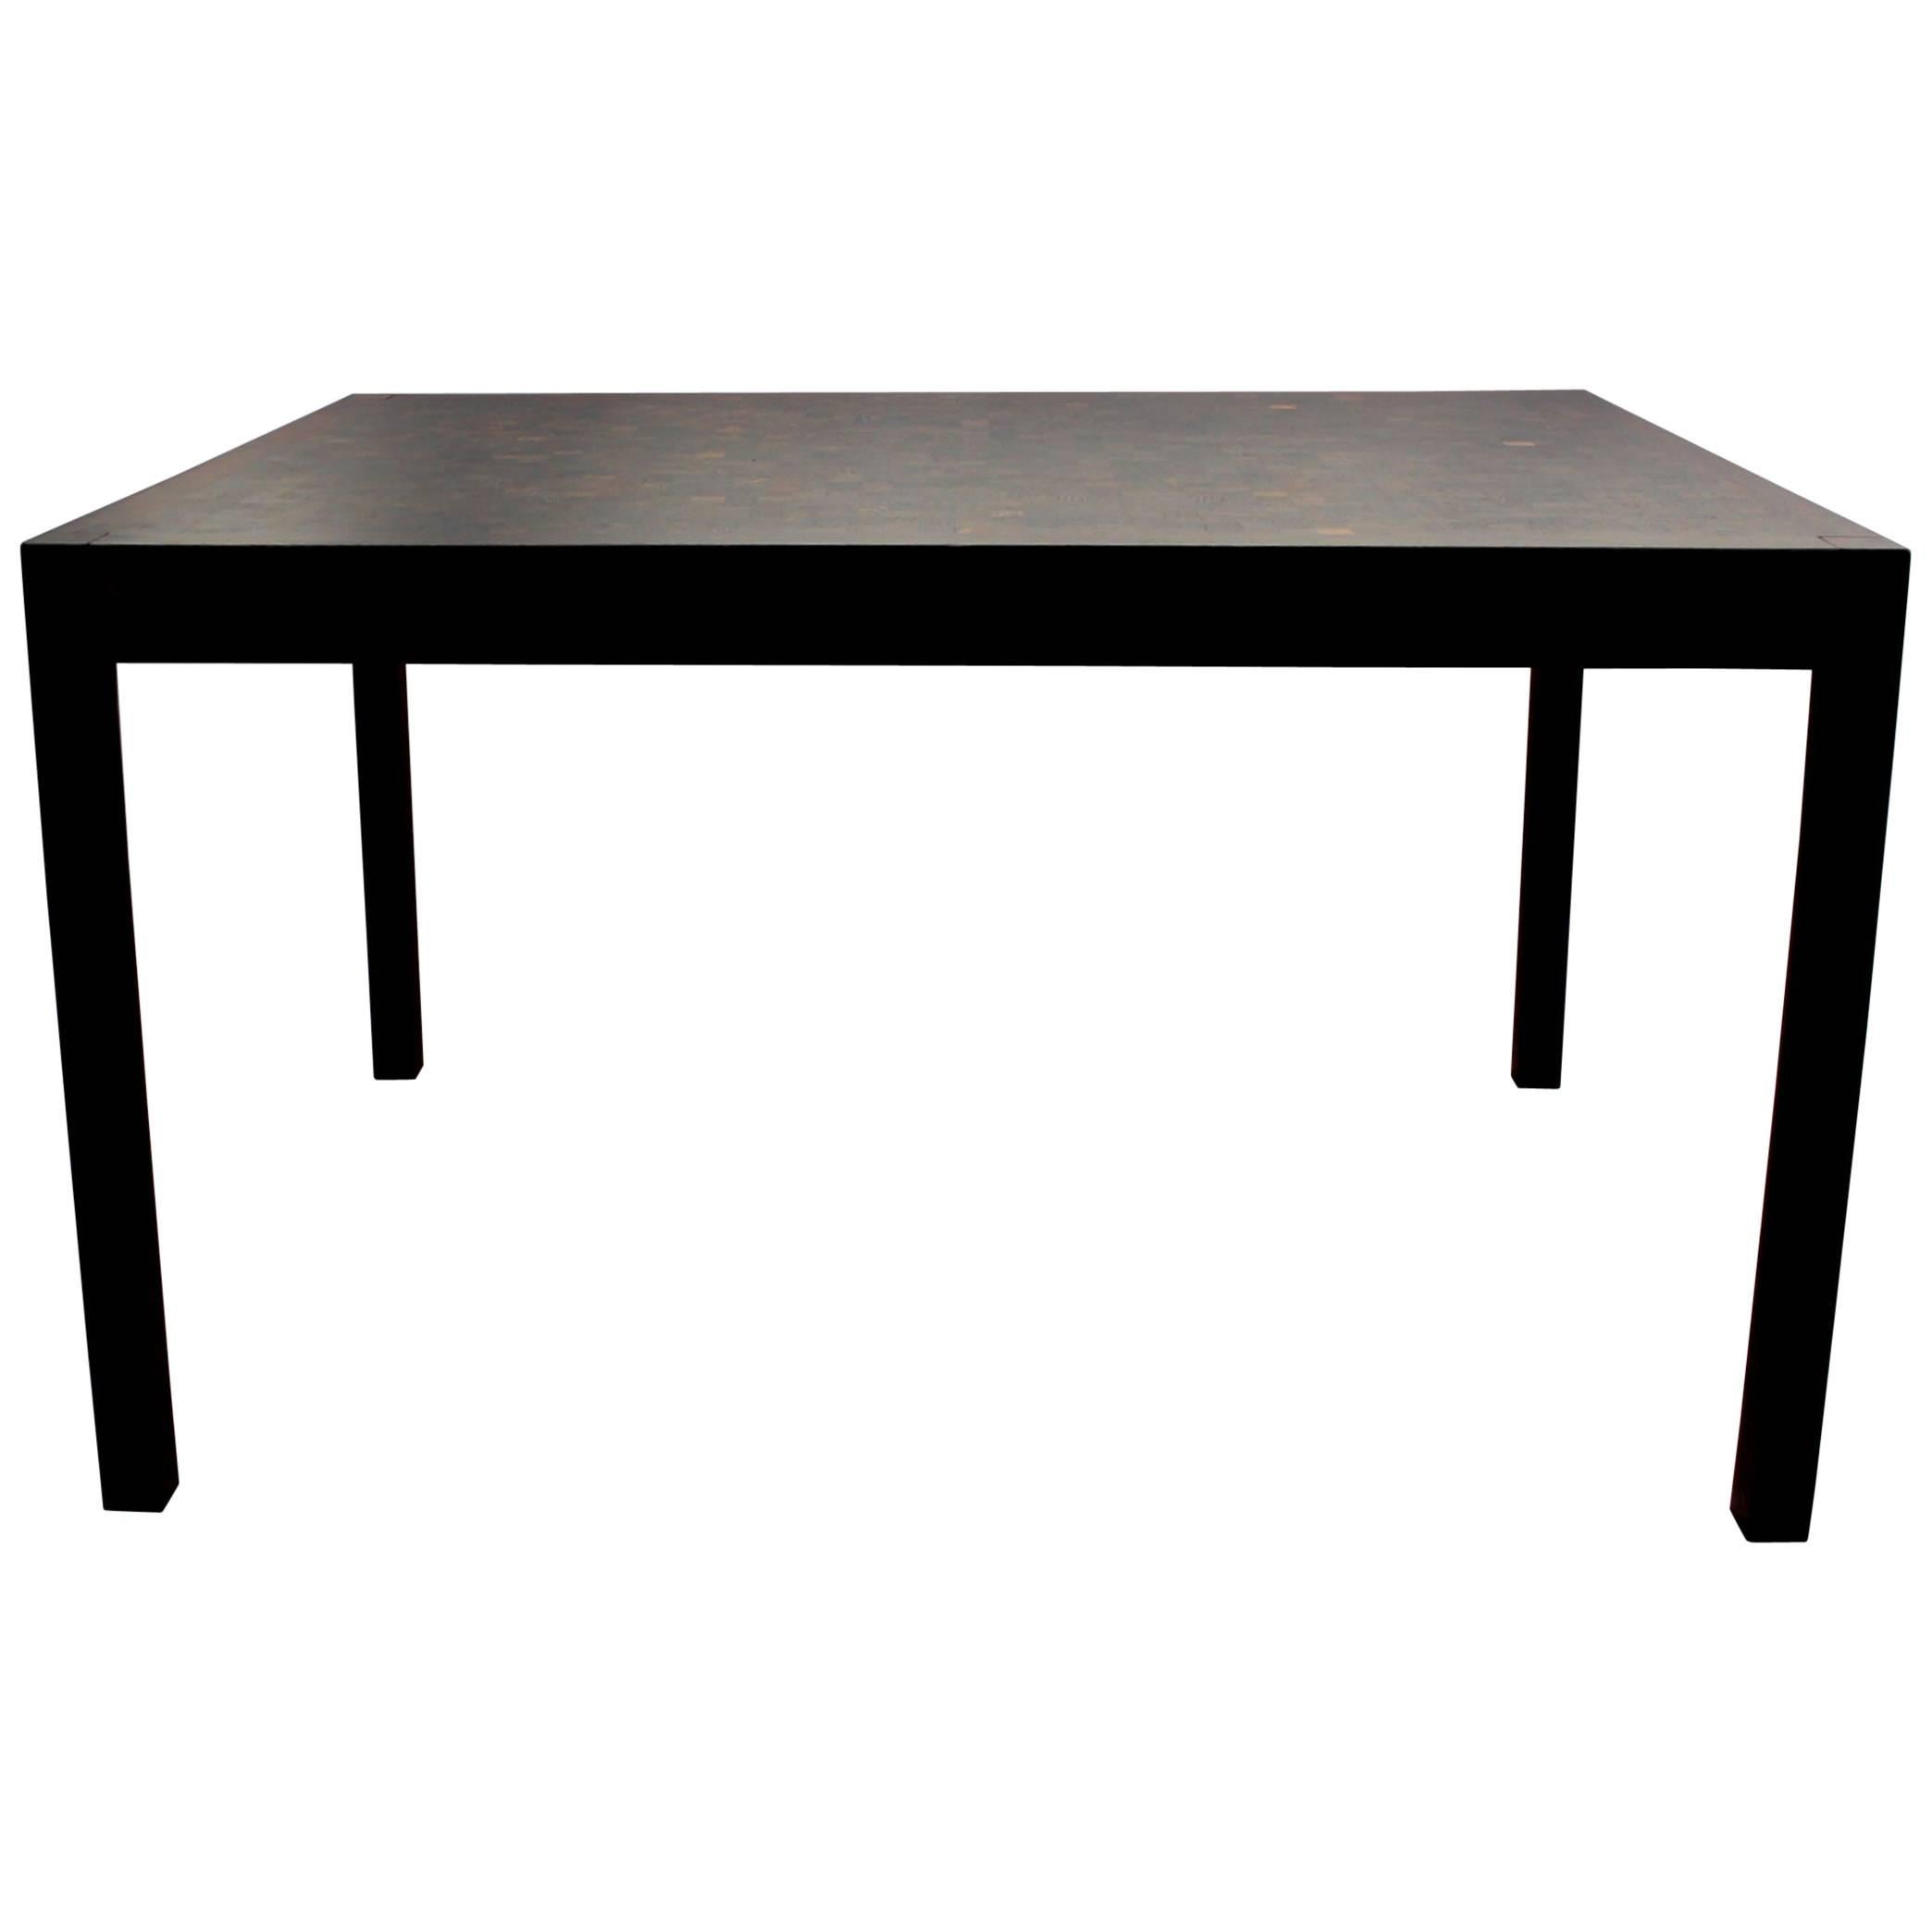 1960s Swiss Wenge Dining Table by Dieter Waeckerlin For Sale